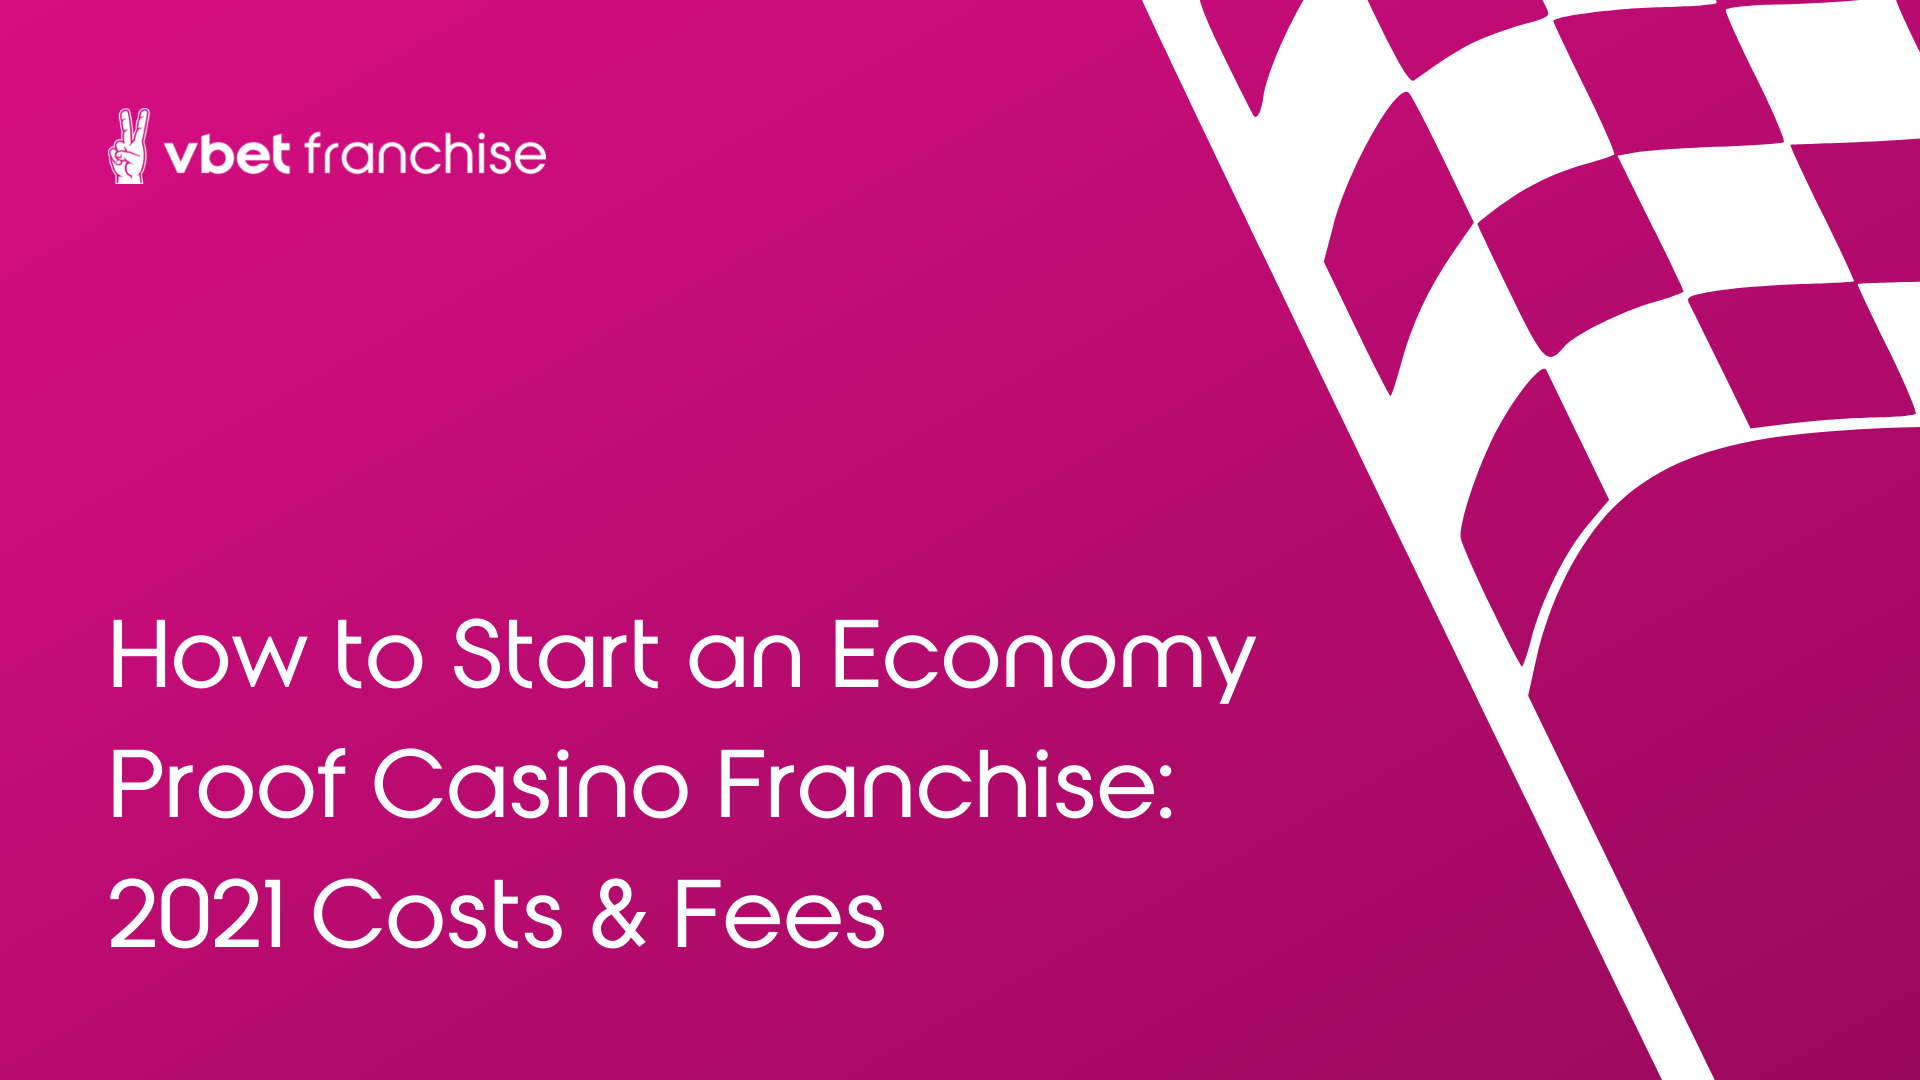 How to Start an Economy Proof Casino Franchise: 2021 Costs & Fees